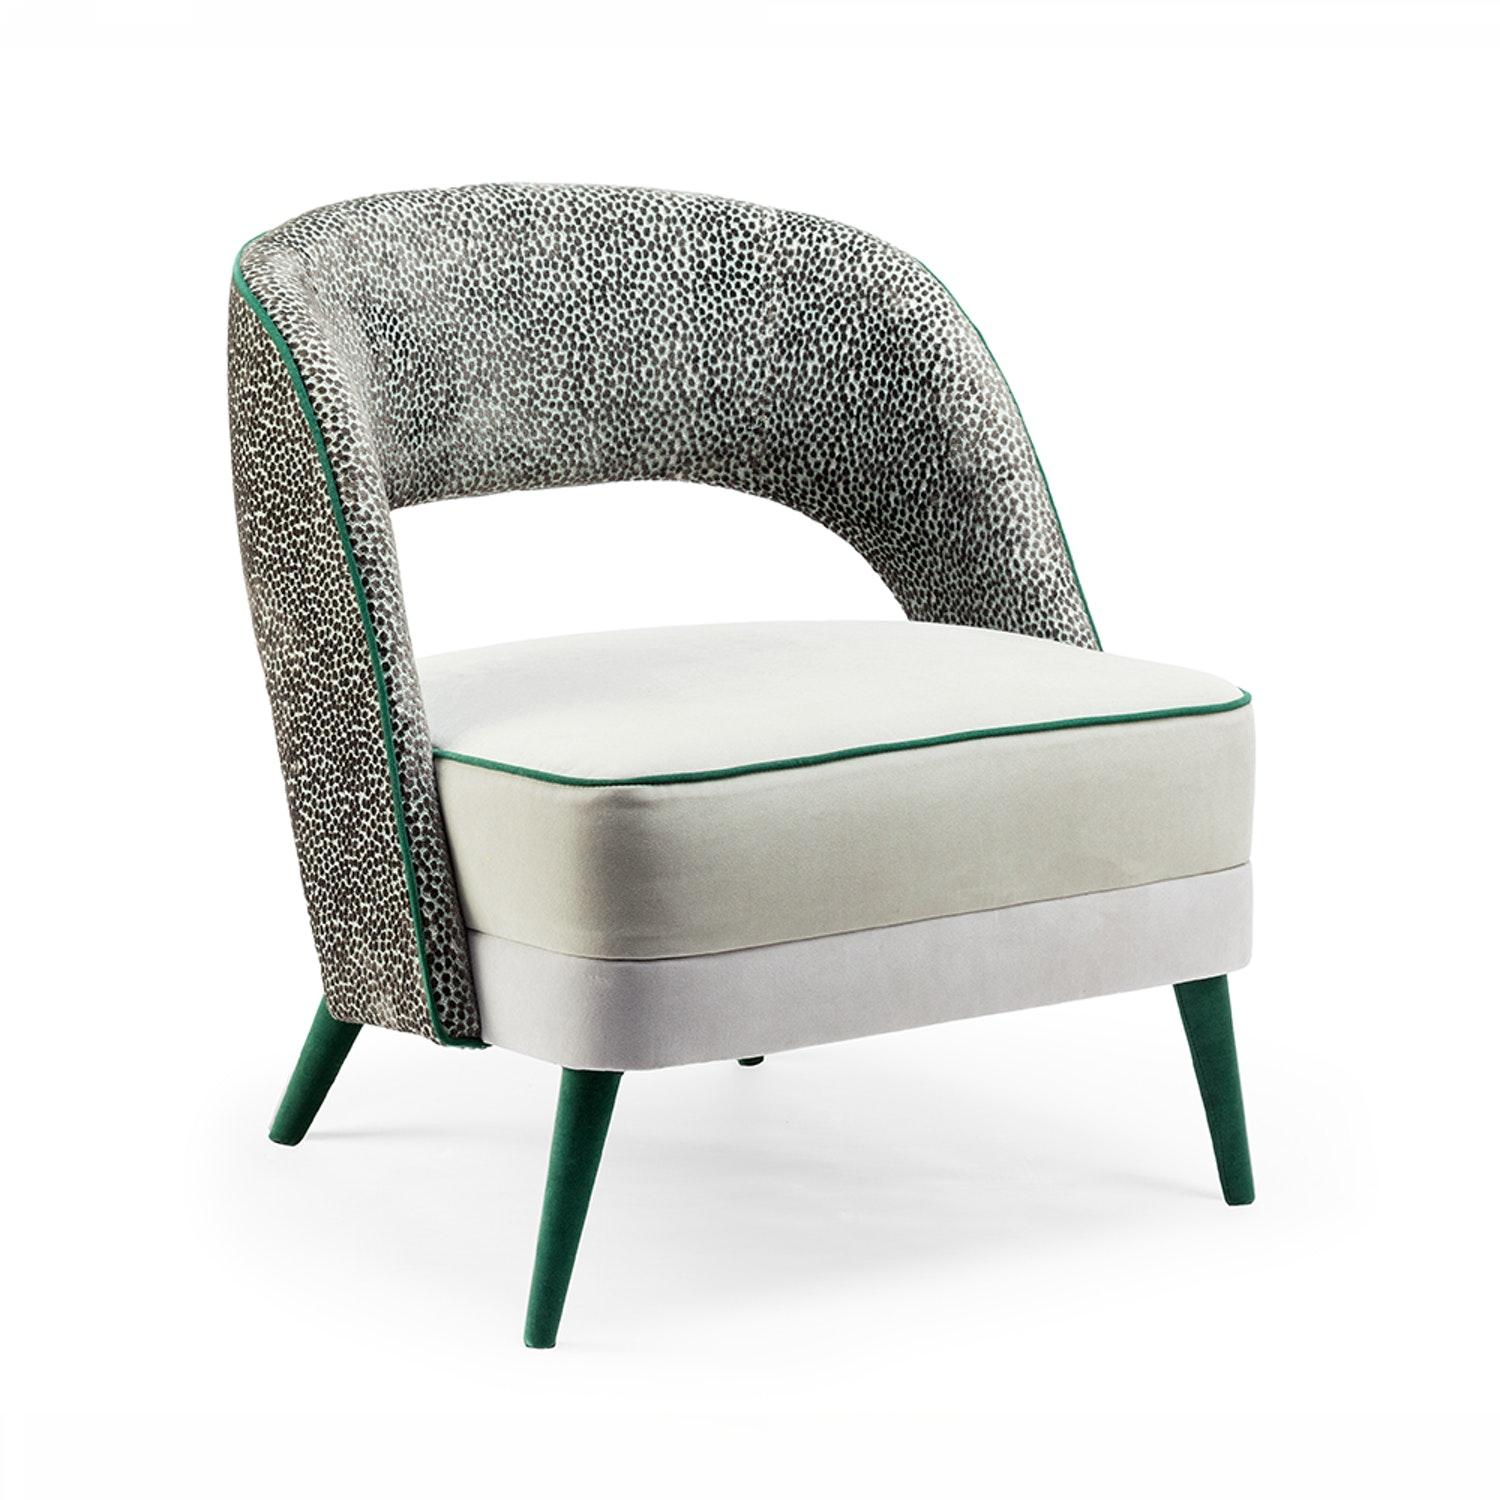 Lacquered Ava Armchair Soft Green Seat and Patterned Olive Green Backrest For Sale